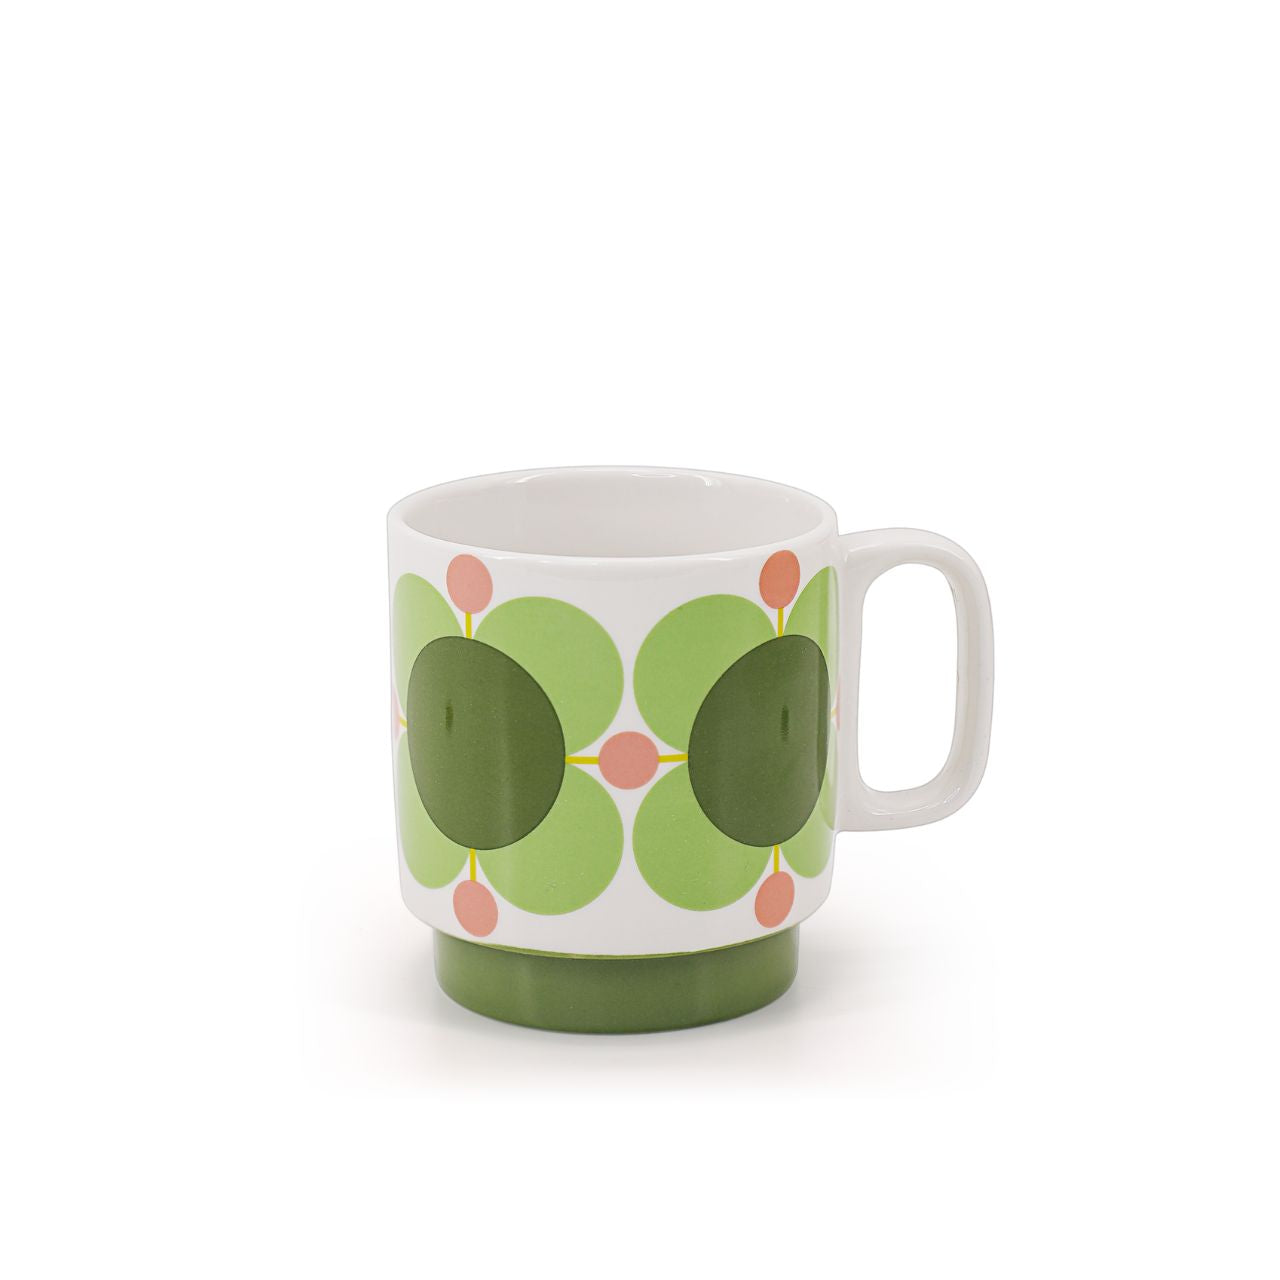 Tipperary Orla Kiely Set 2 Stacking Mugs - Atomic Flower Bubblegum & Basil  DESIGNED IN THE UK BY ORLA KIELY: This set of two mugs has a unique 'Atomic Flower' print and is designed to be stacked.